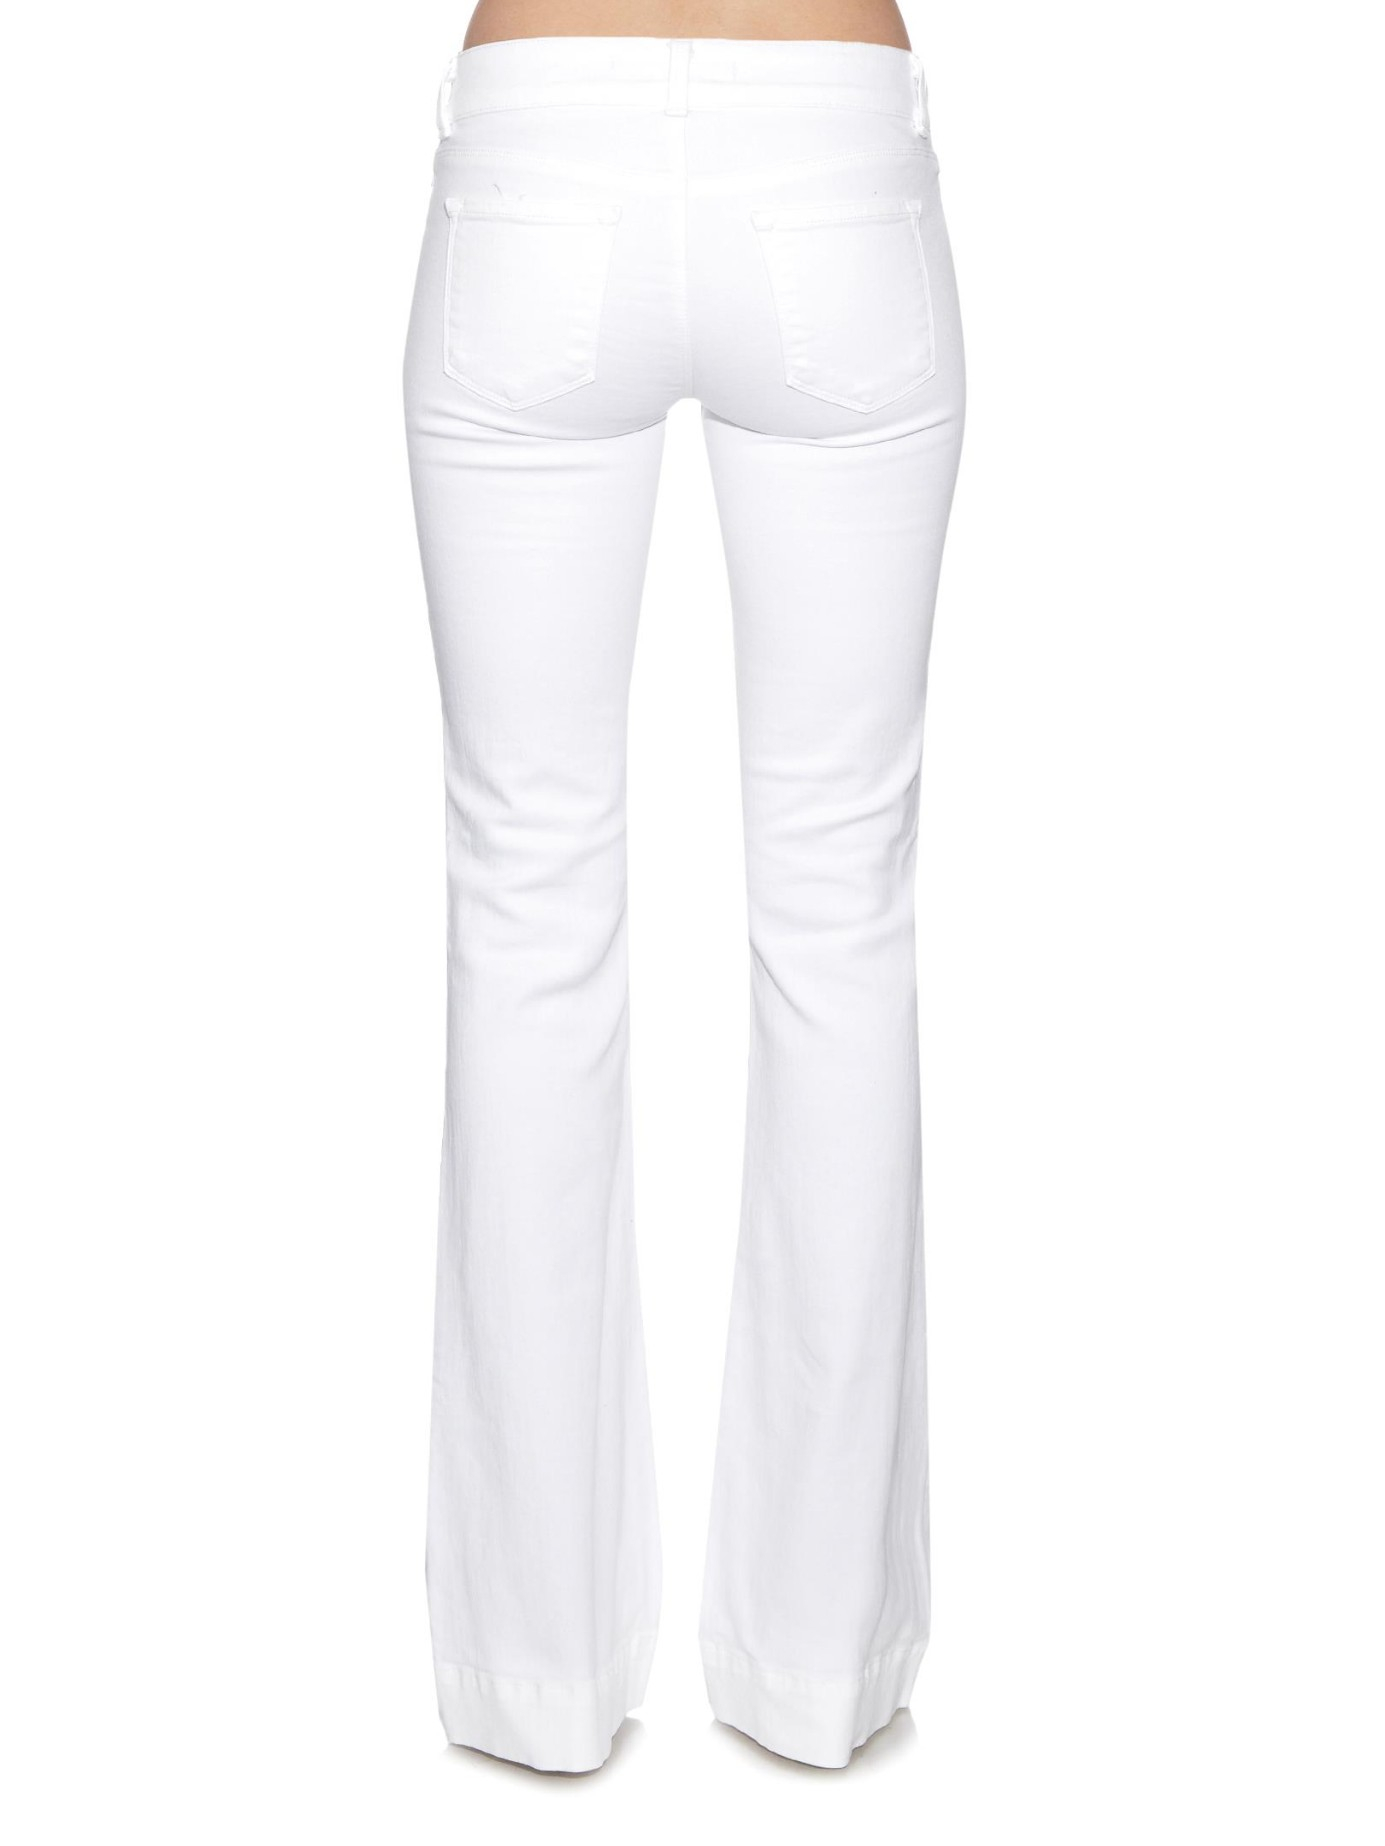 Giotto Dibondon pause chokolade J Brand Love Story Low-rise Flared Jeans in White | Lyst